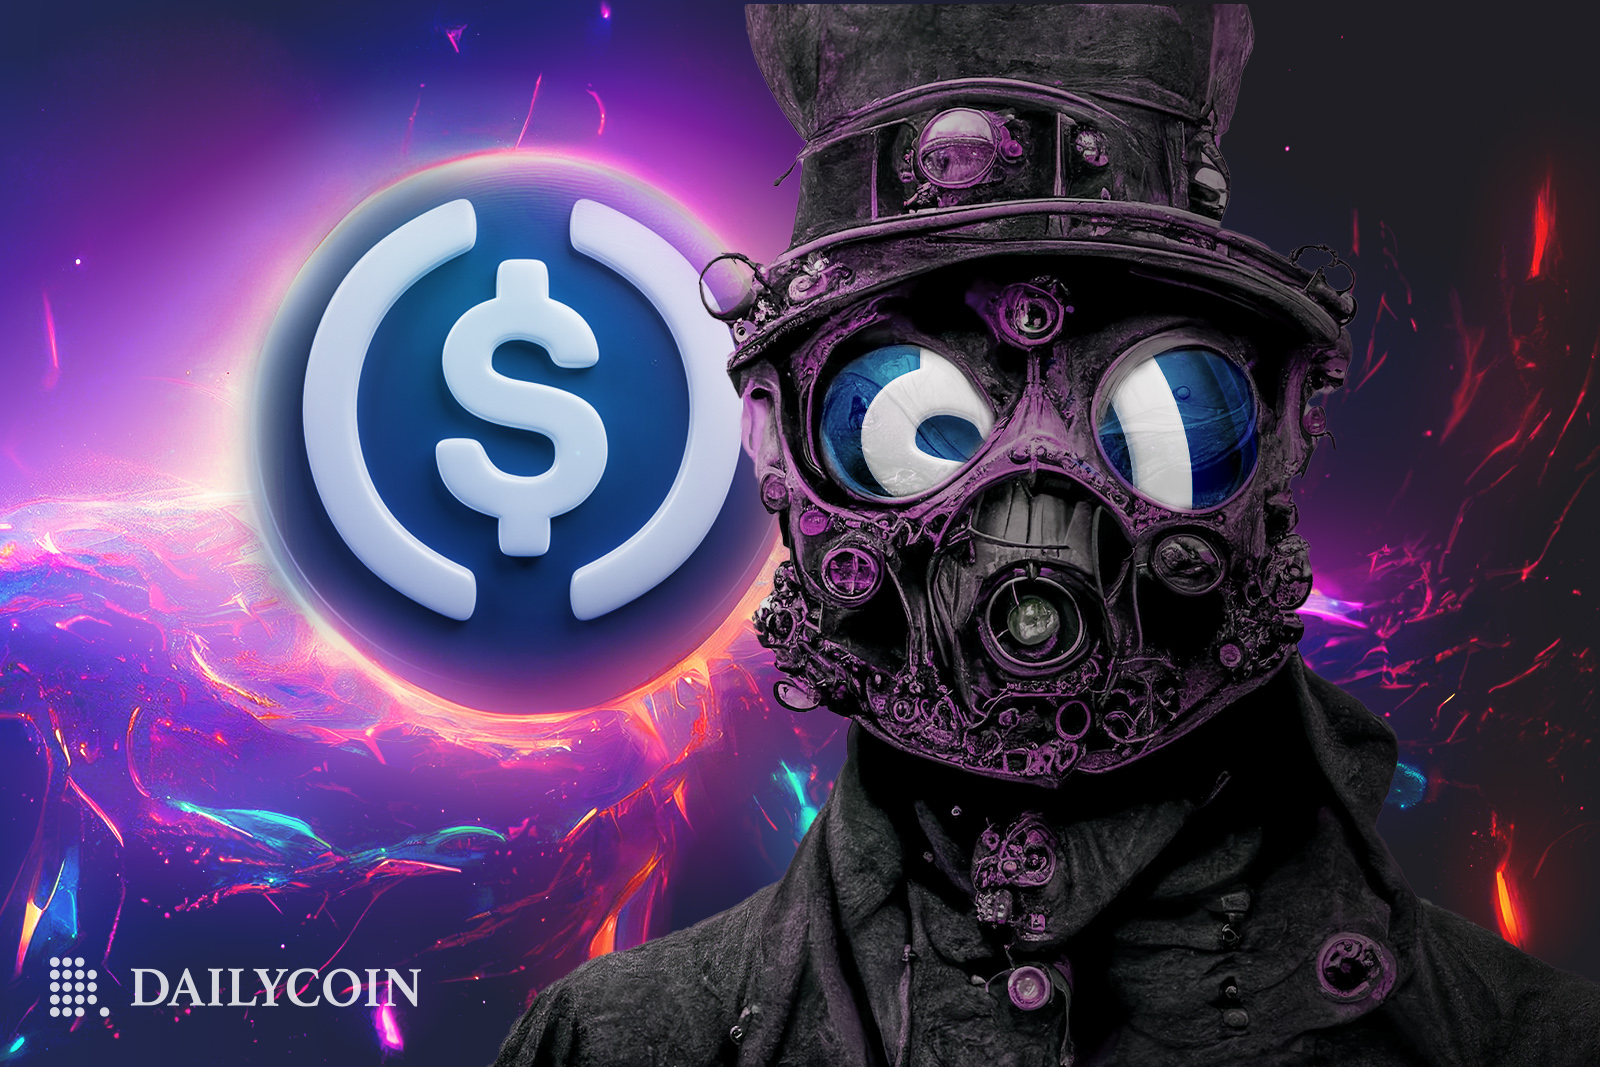 Cyberpunk man with mask in front of a USDC token.